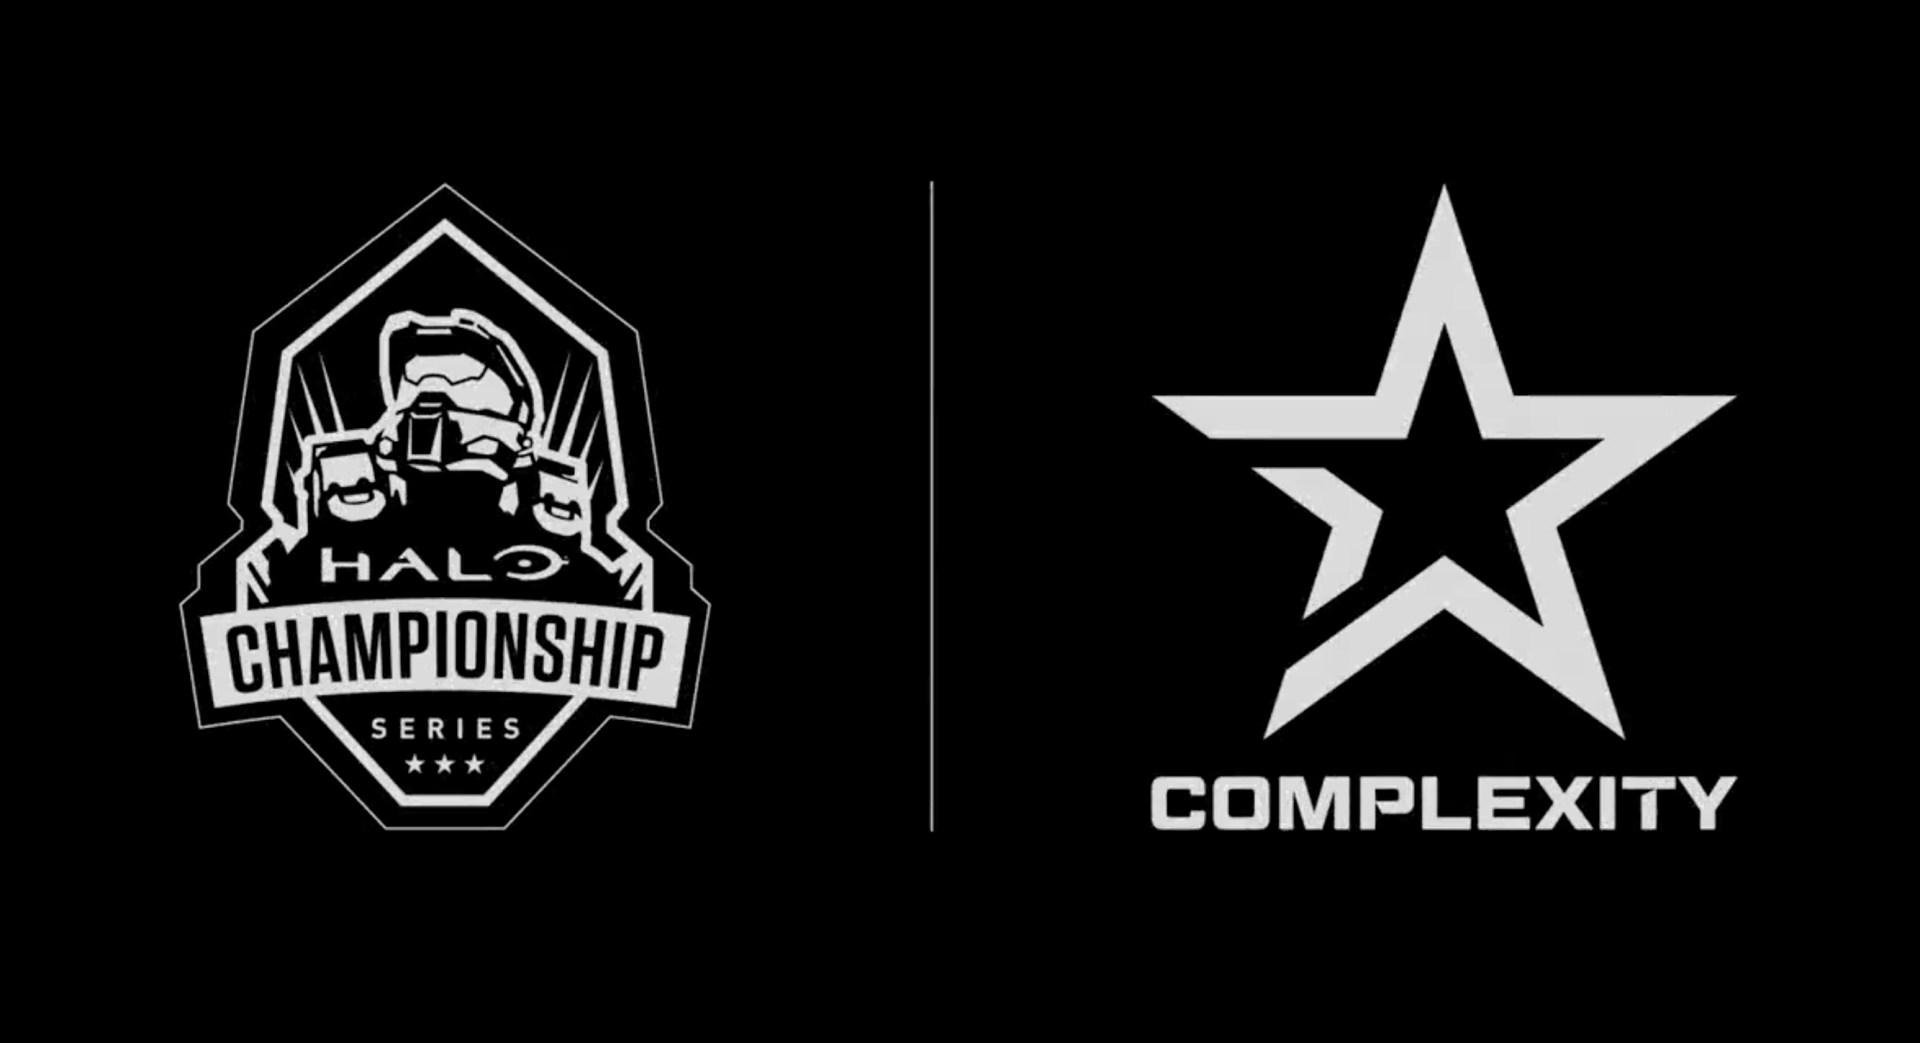 Complexity becomes latest Halo Championship Series partner team